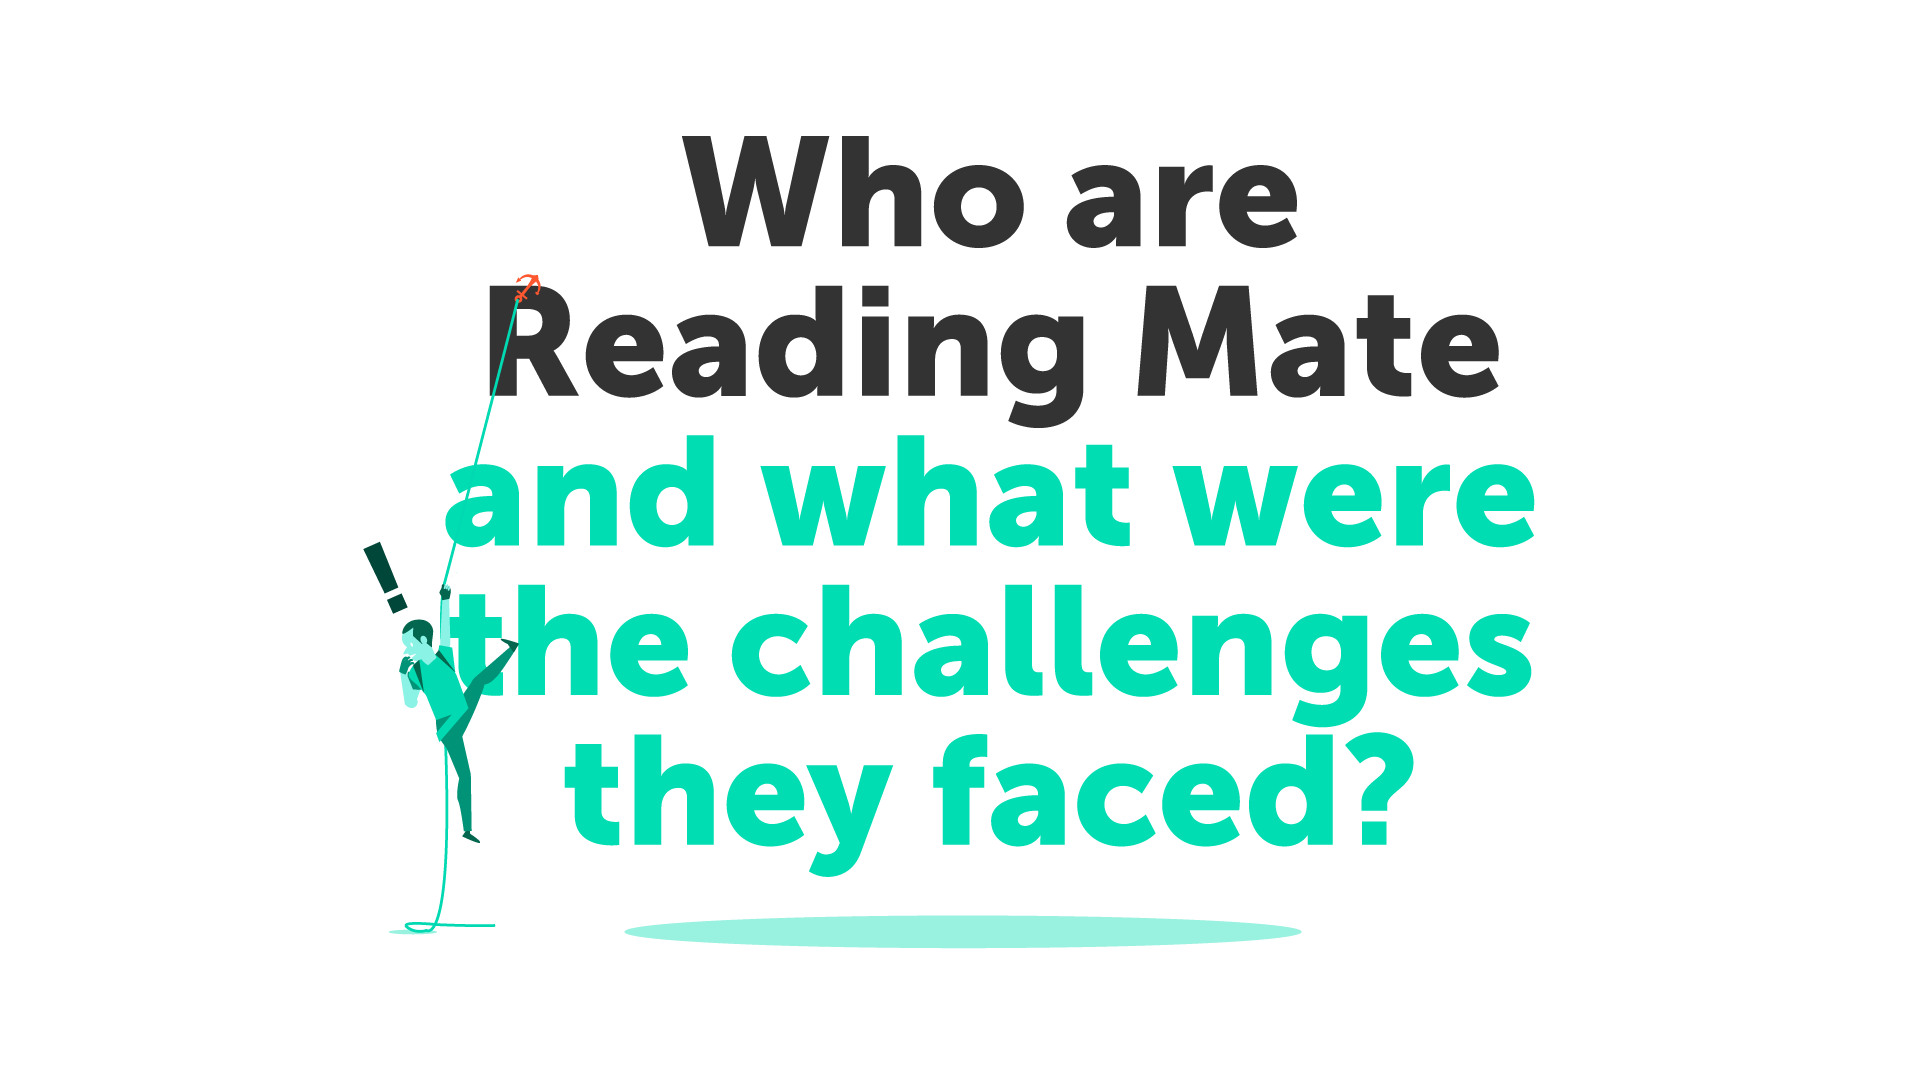 Who were Reading Mate and what were the challenges they faced?